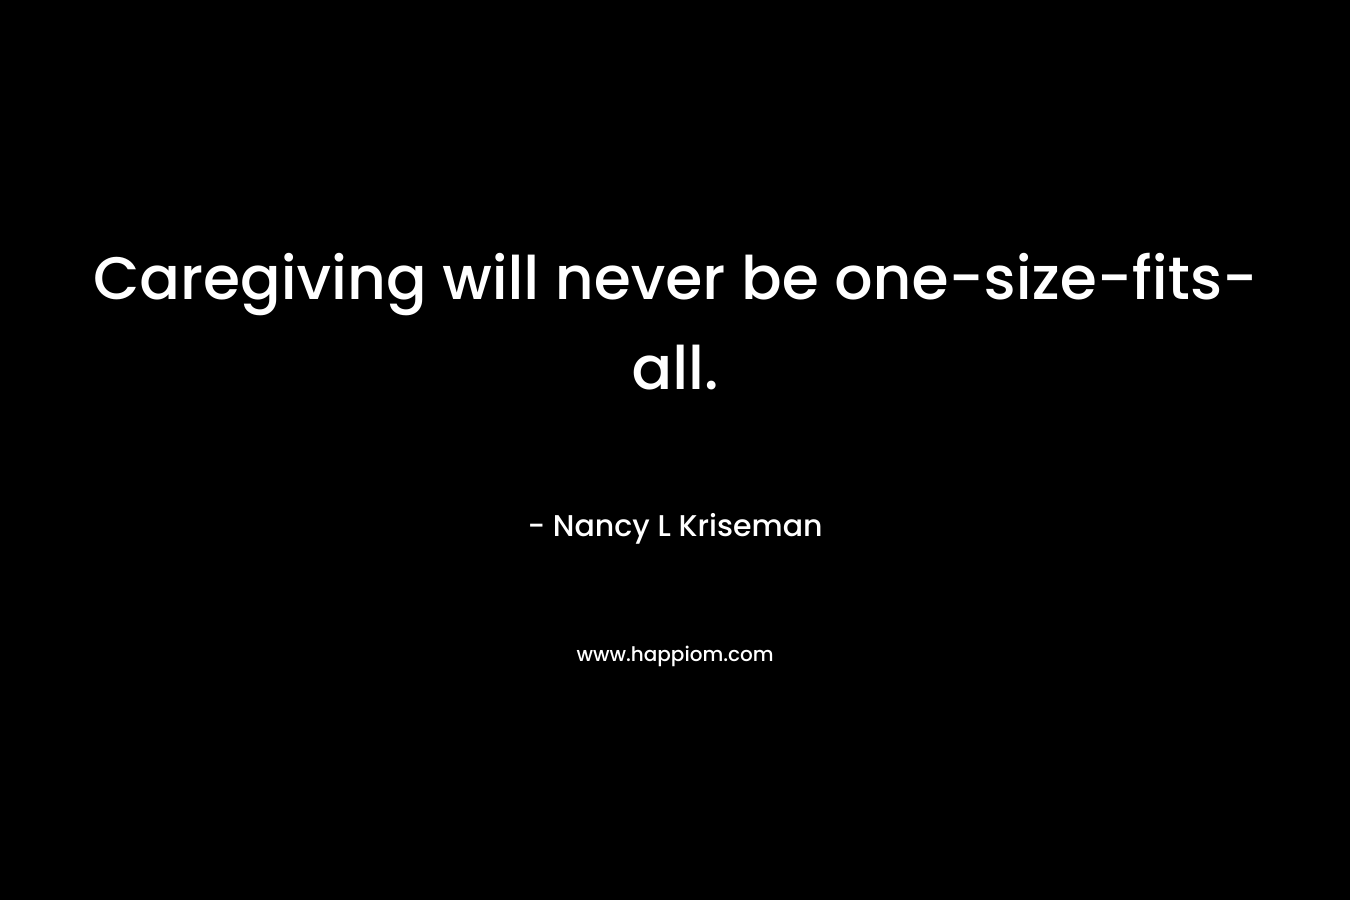 Caregiving will never be one-size-fits-all. – Nancy L Kriseman